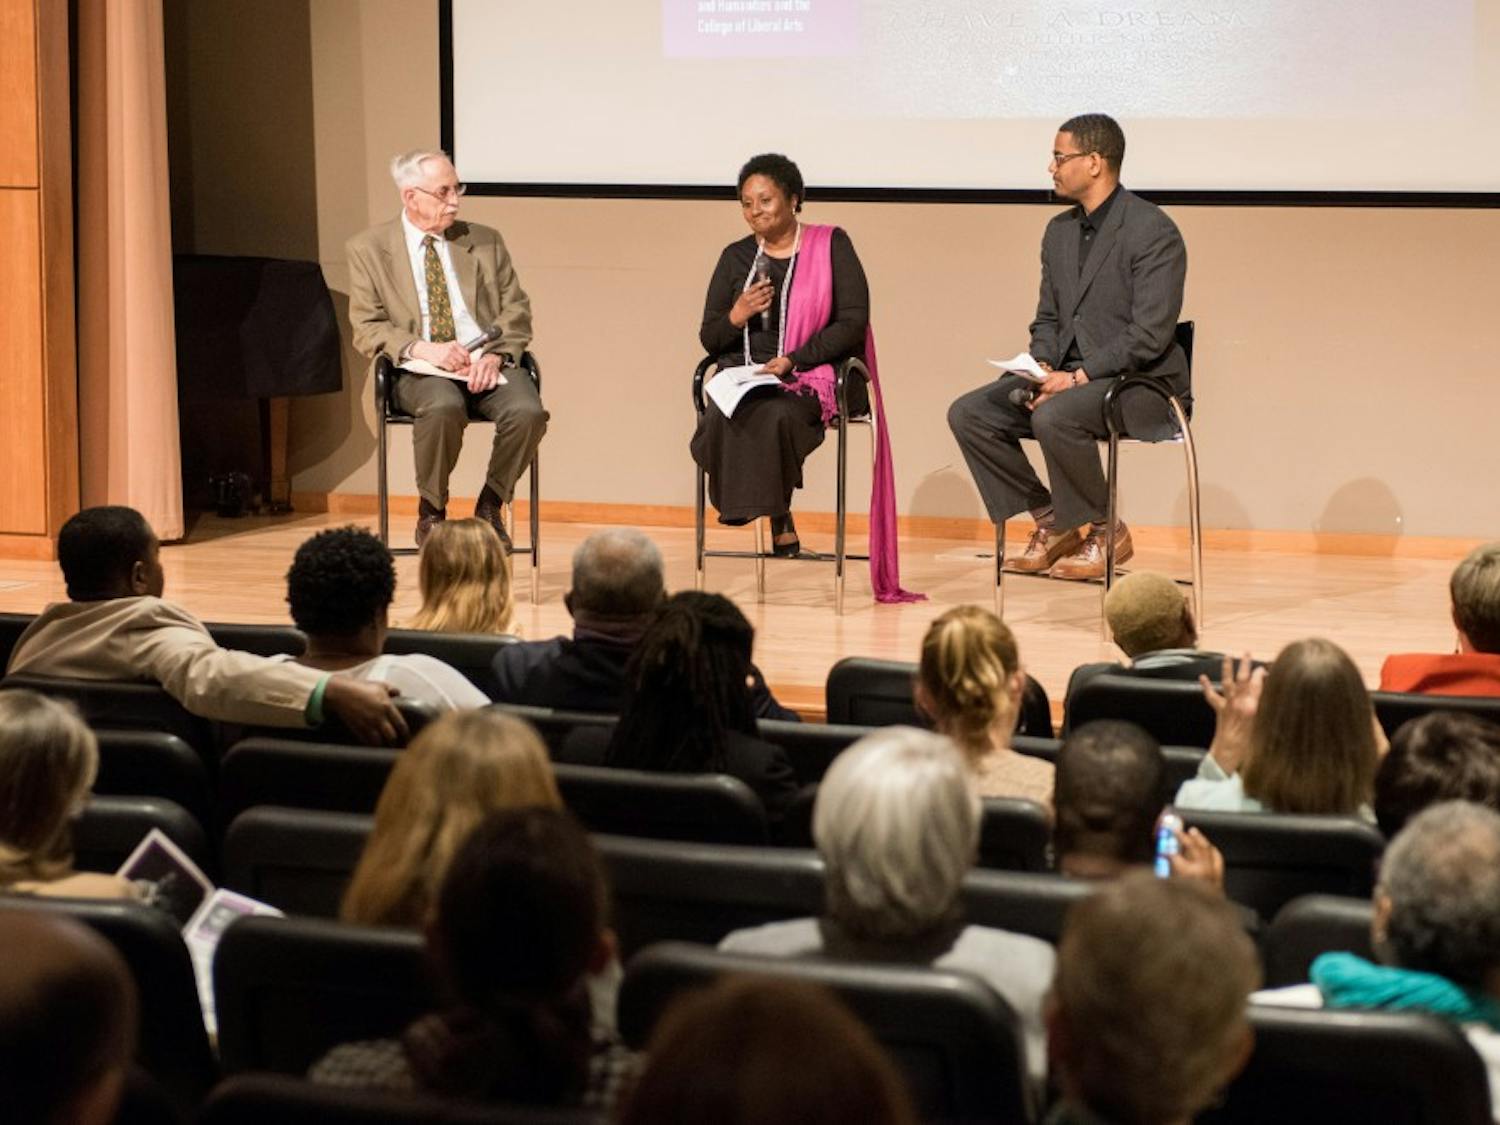 Dr. Wayne Flint, Joan Harrell, and Rev. Dr. Otis Moss speak at the Becoming the Beloved Community event at the Jule Collins Smith Museum of Fine Art in Auburn, Ala., on Thursday, April 5, 2018.